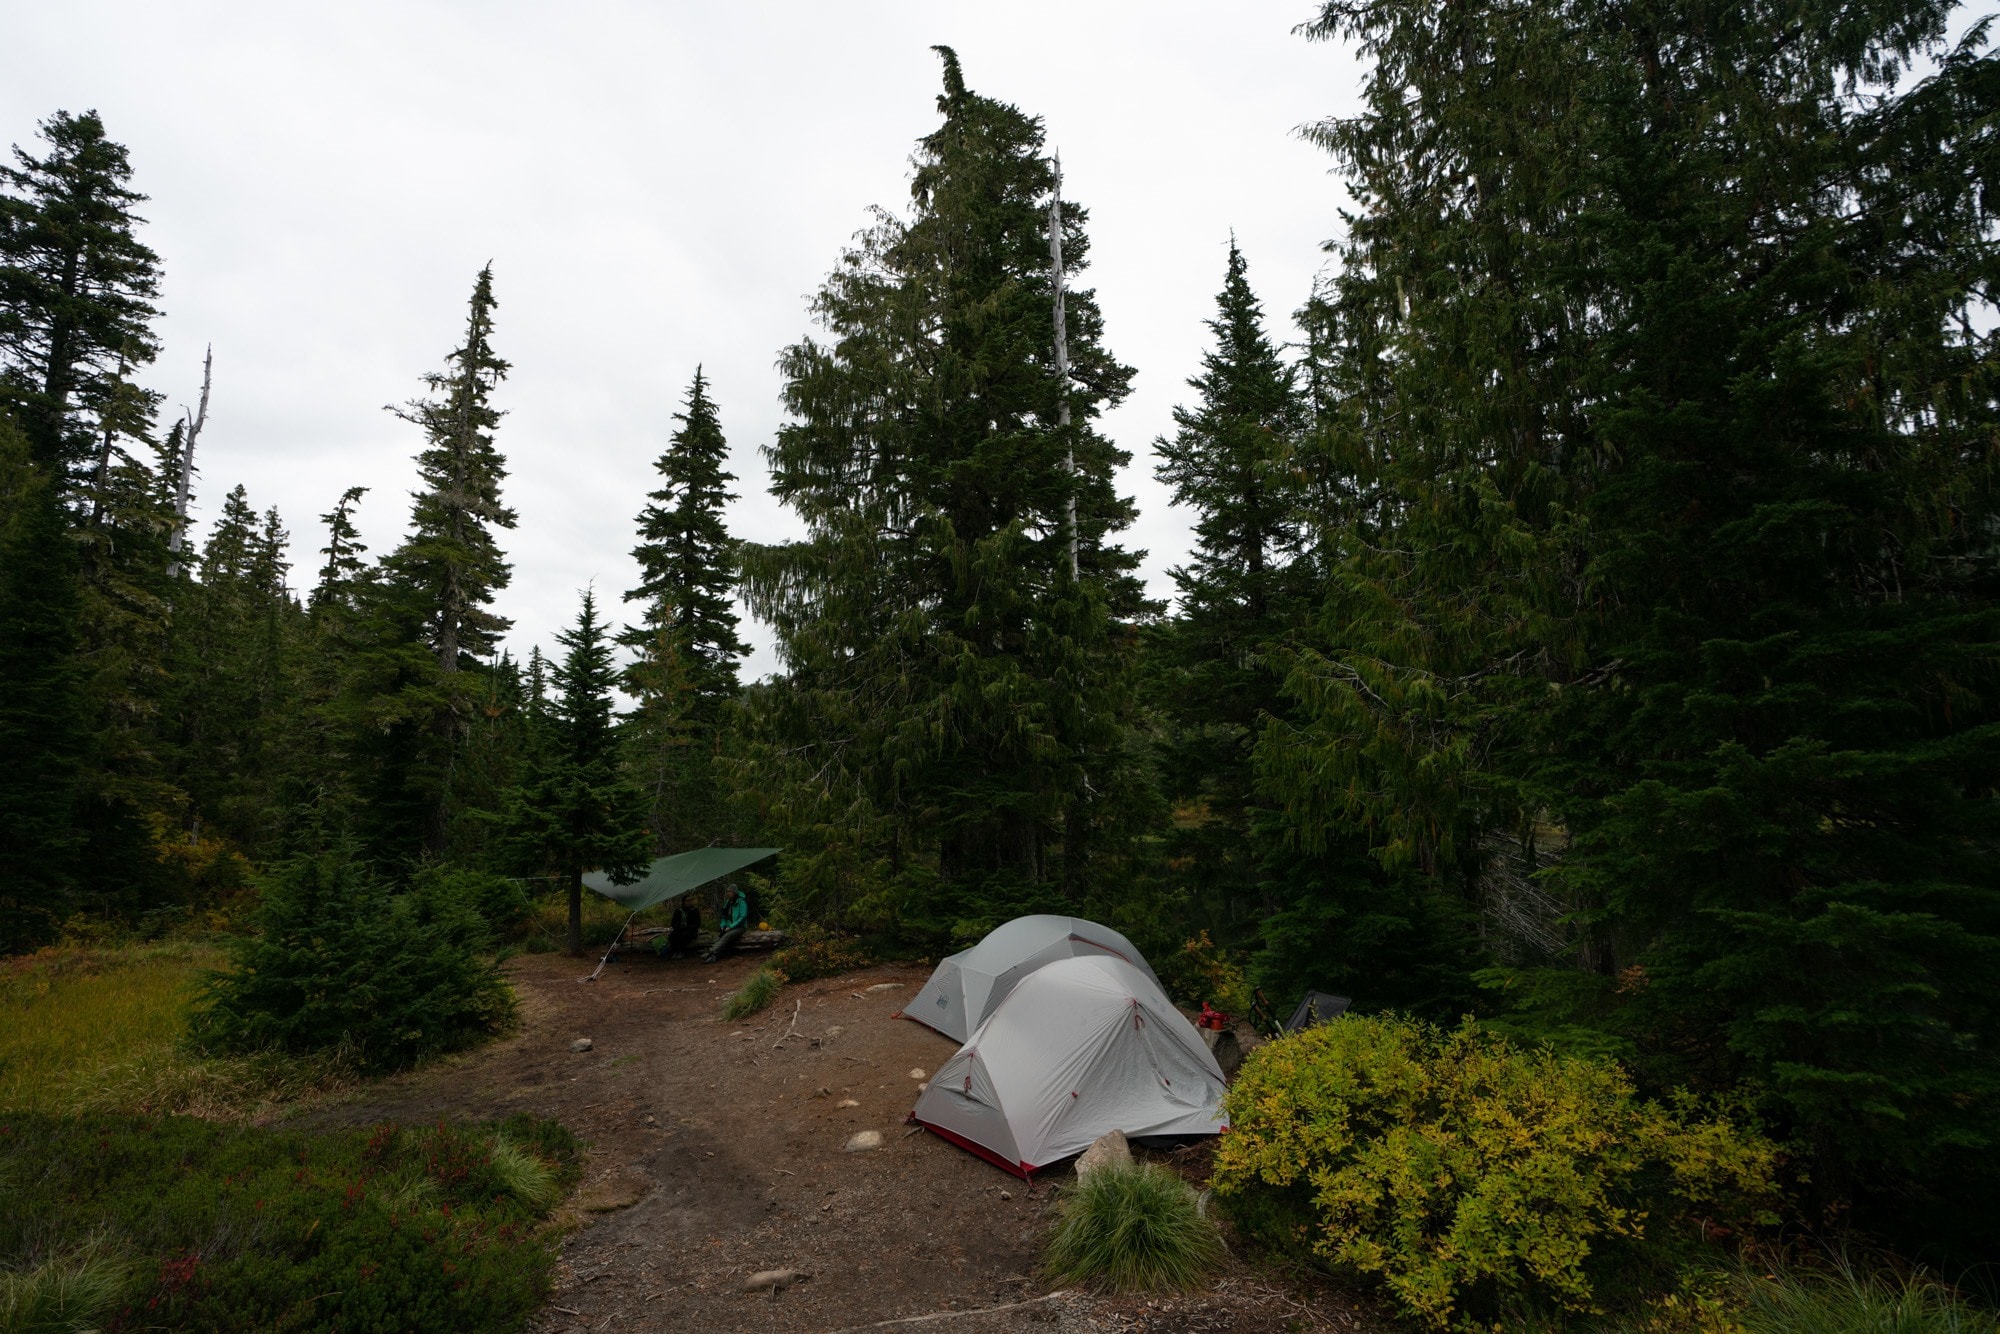 Tents set up at camp on the Olympic Peninsula in Washington